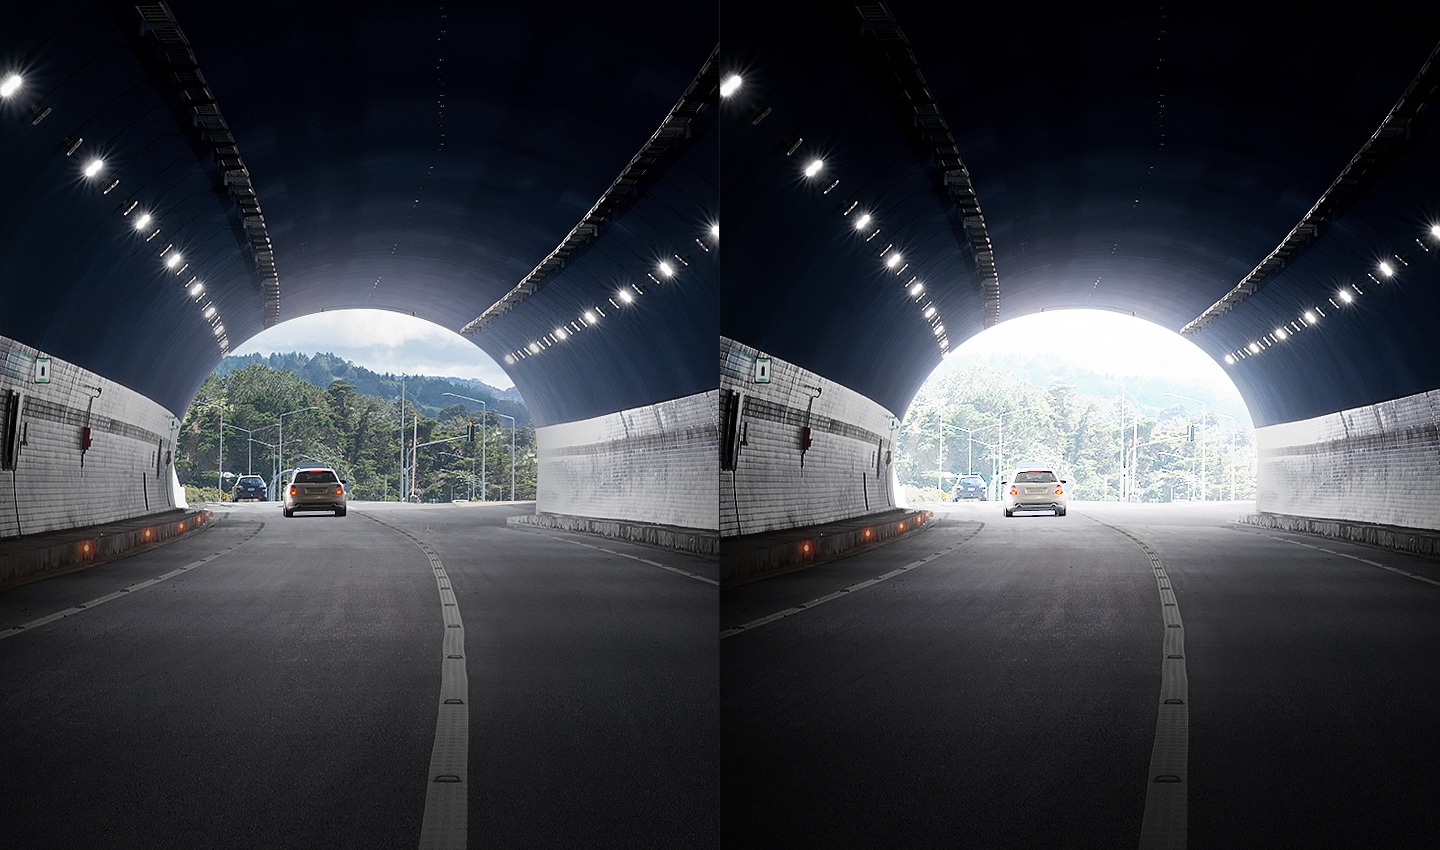 This is an image that is divided in half and compared. On the left, the outside of the tunnel is clearly visible, and on the right, the outside of the tunnel is blurry.